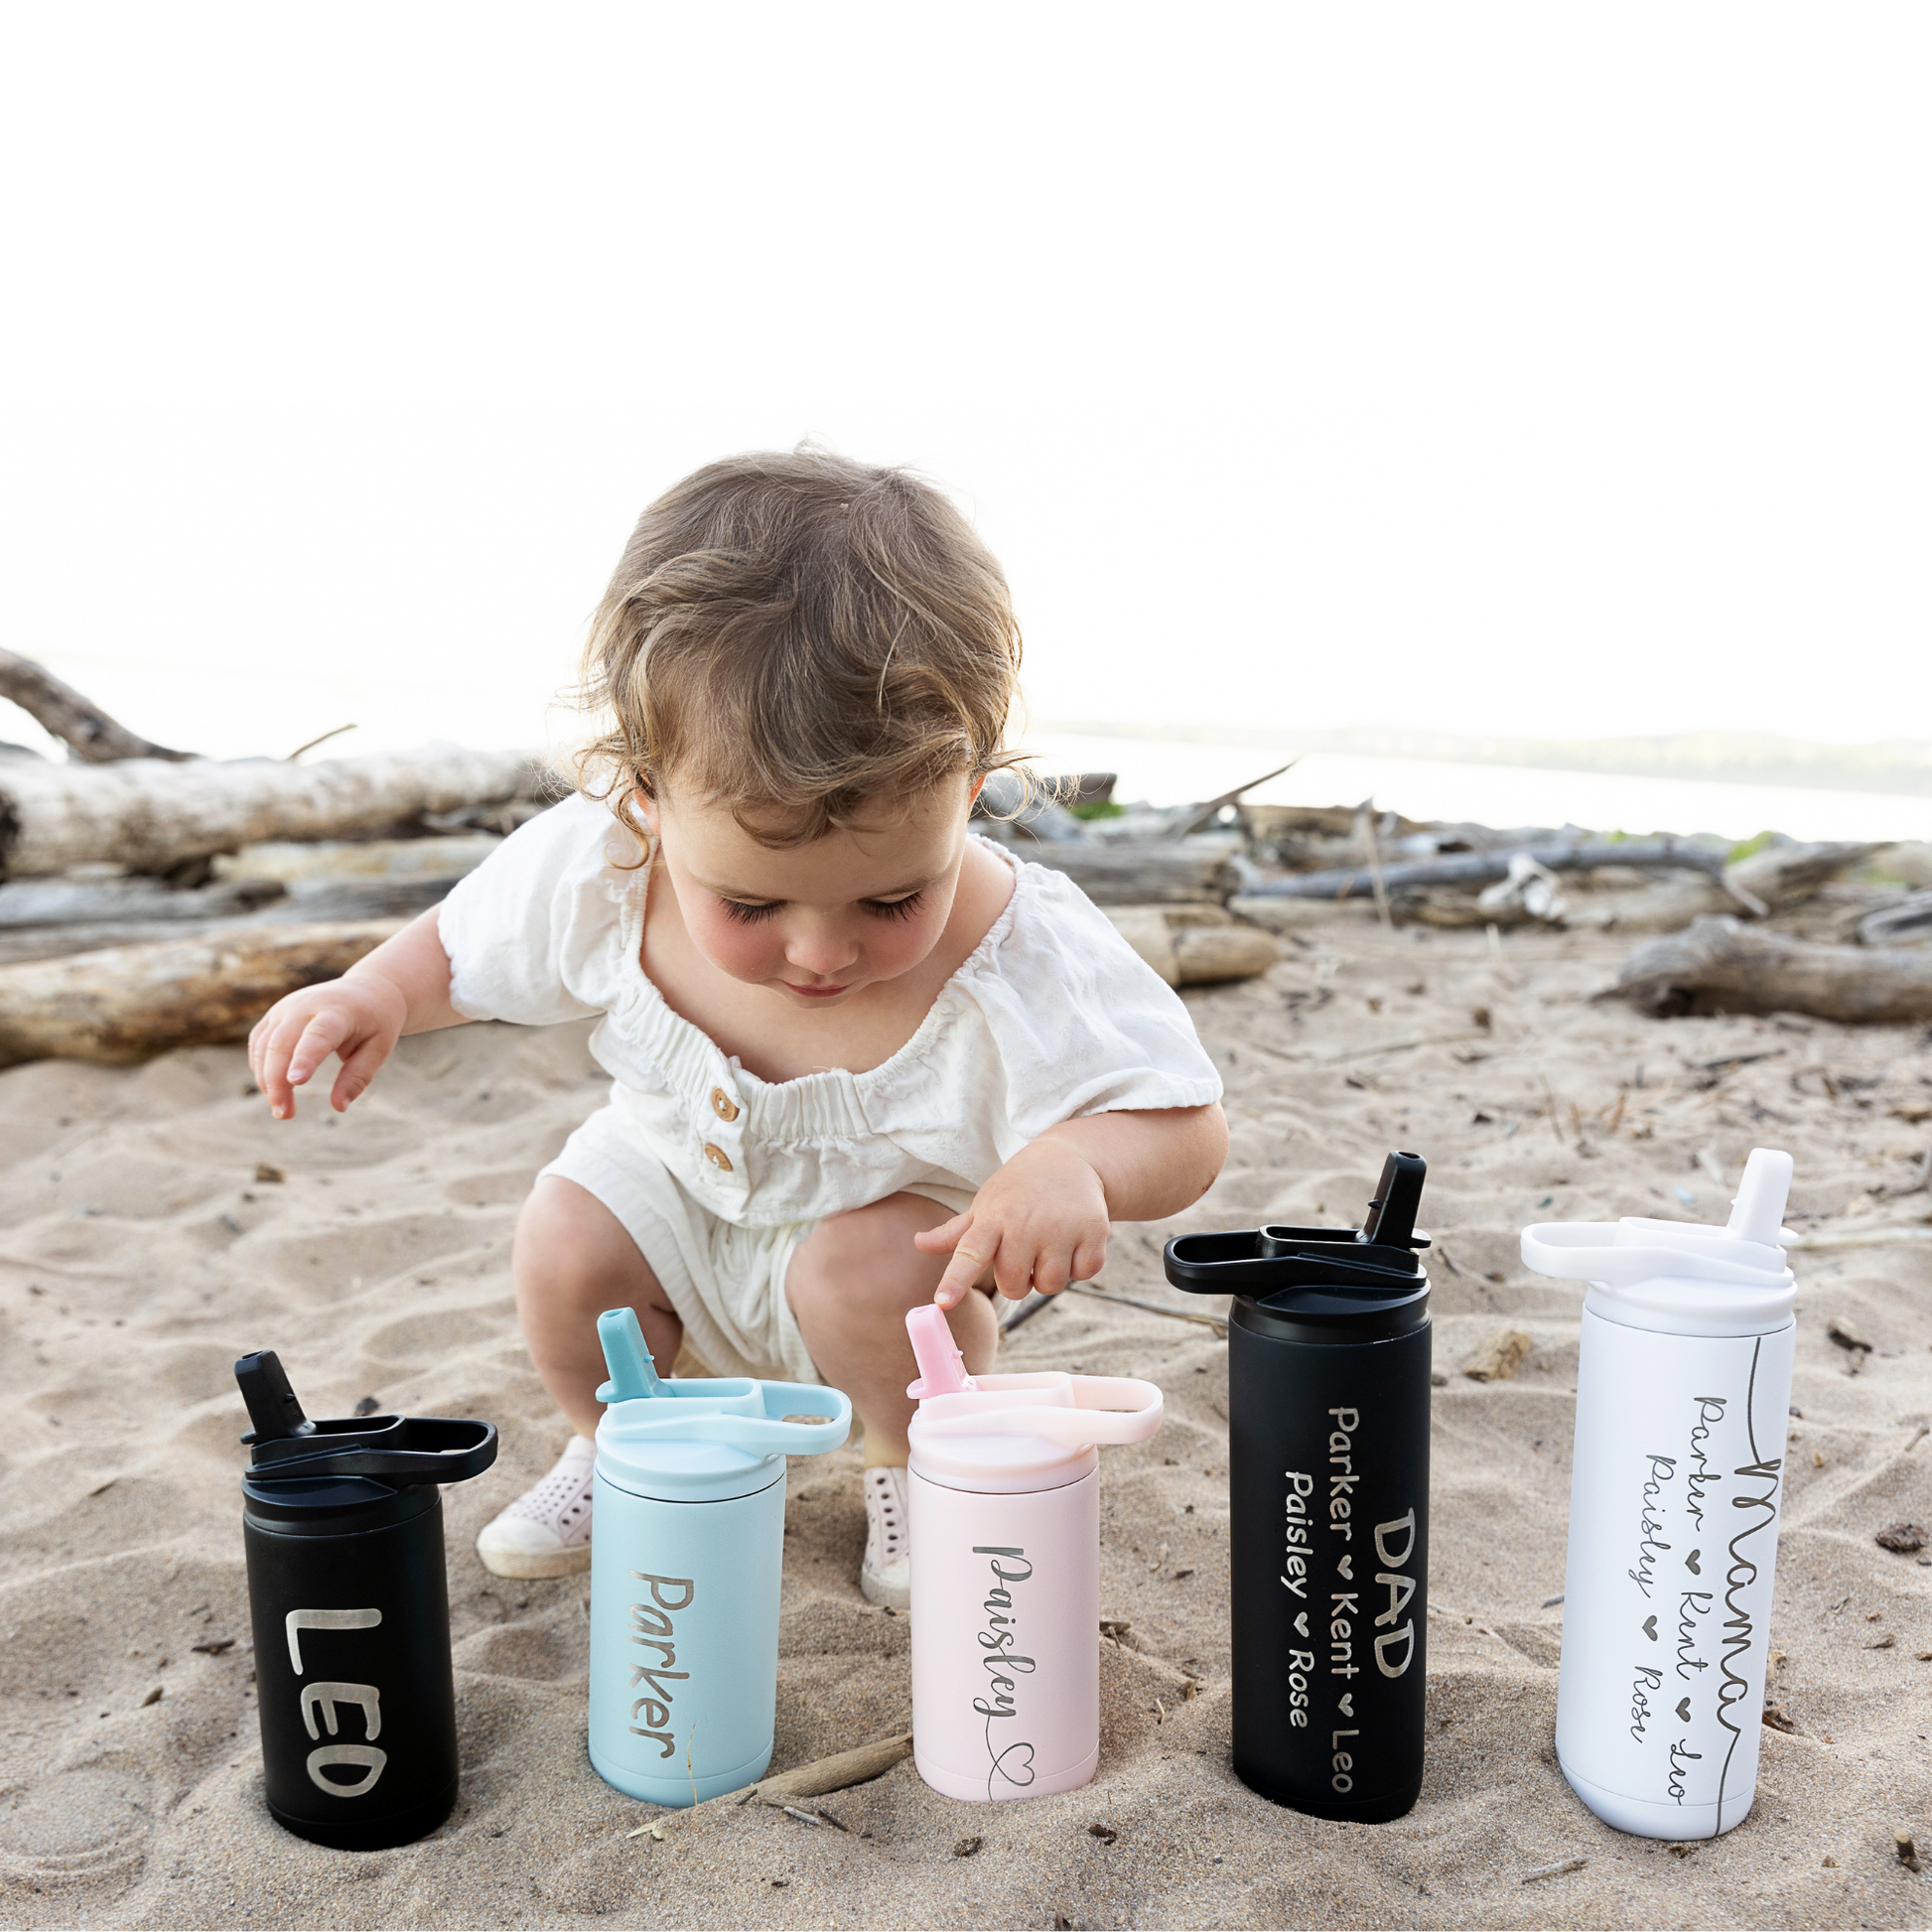 Personalized Kids Tumblers, Kids Cups, Kids Water Bottles Personalized,  Laser Engraved Kids Cups, Stainless Steel 12oz Tumblers Kids 